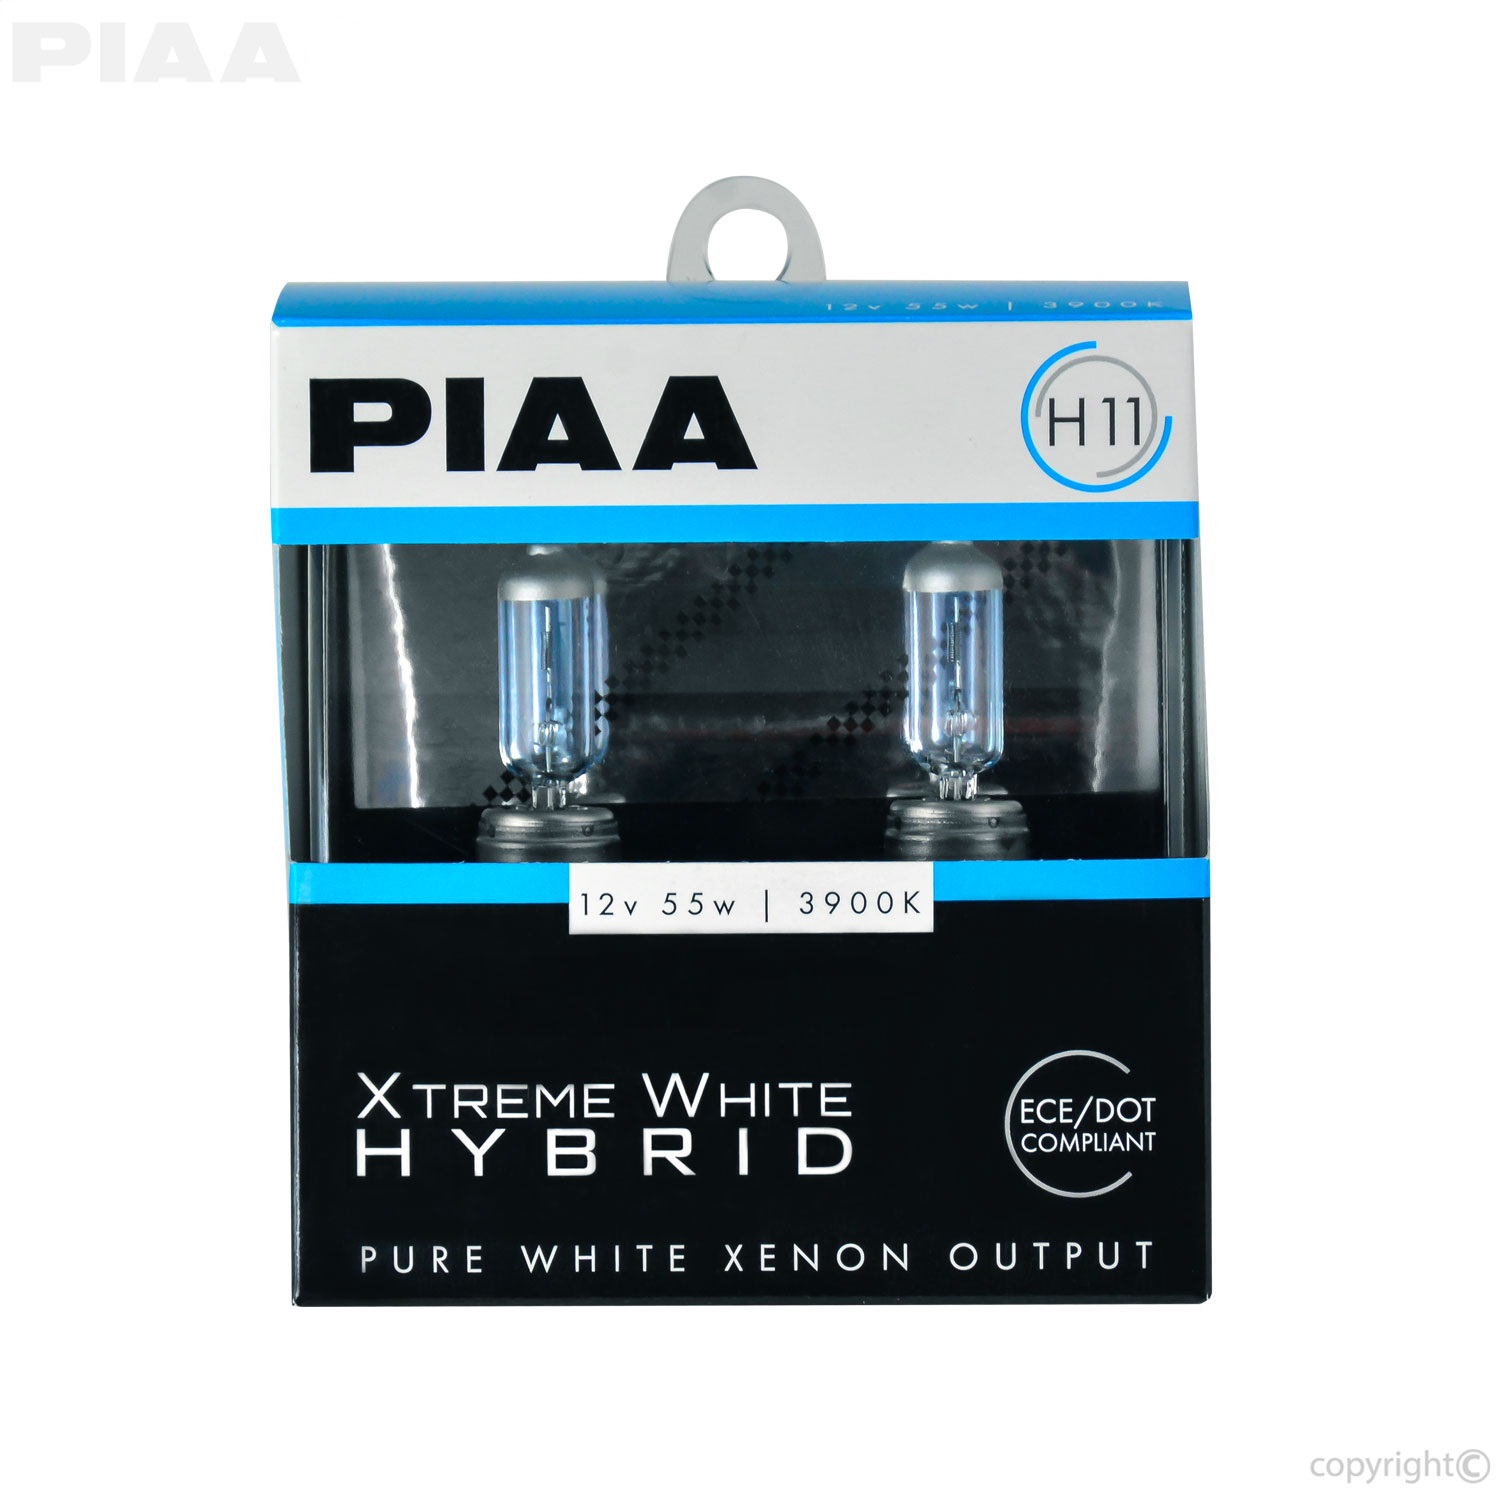 PIAA H11 XTreme White Hybrid Twin Pack Halogen Bulbs - 23-10111 - image 2 of 2